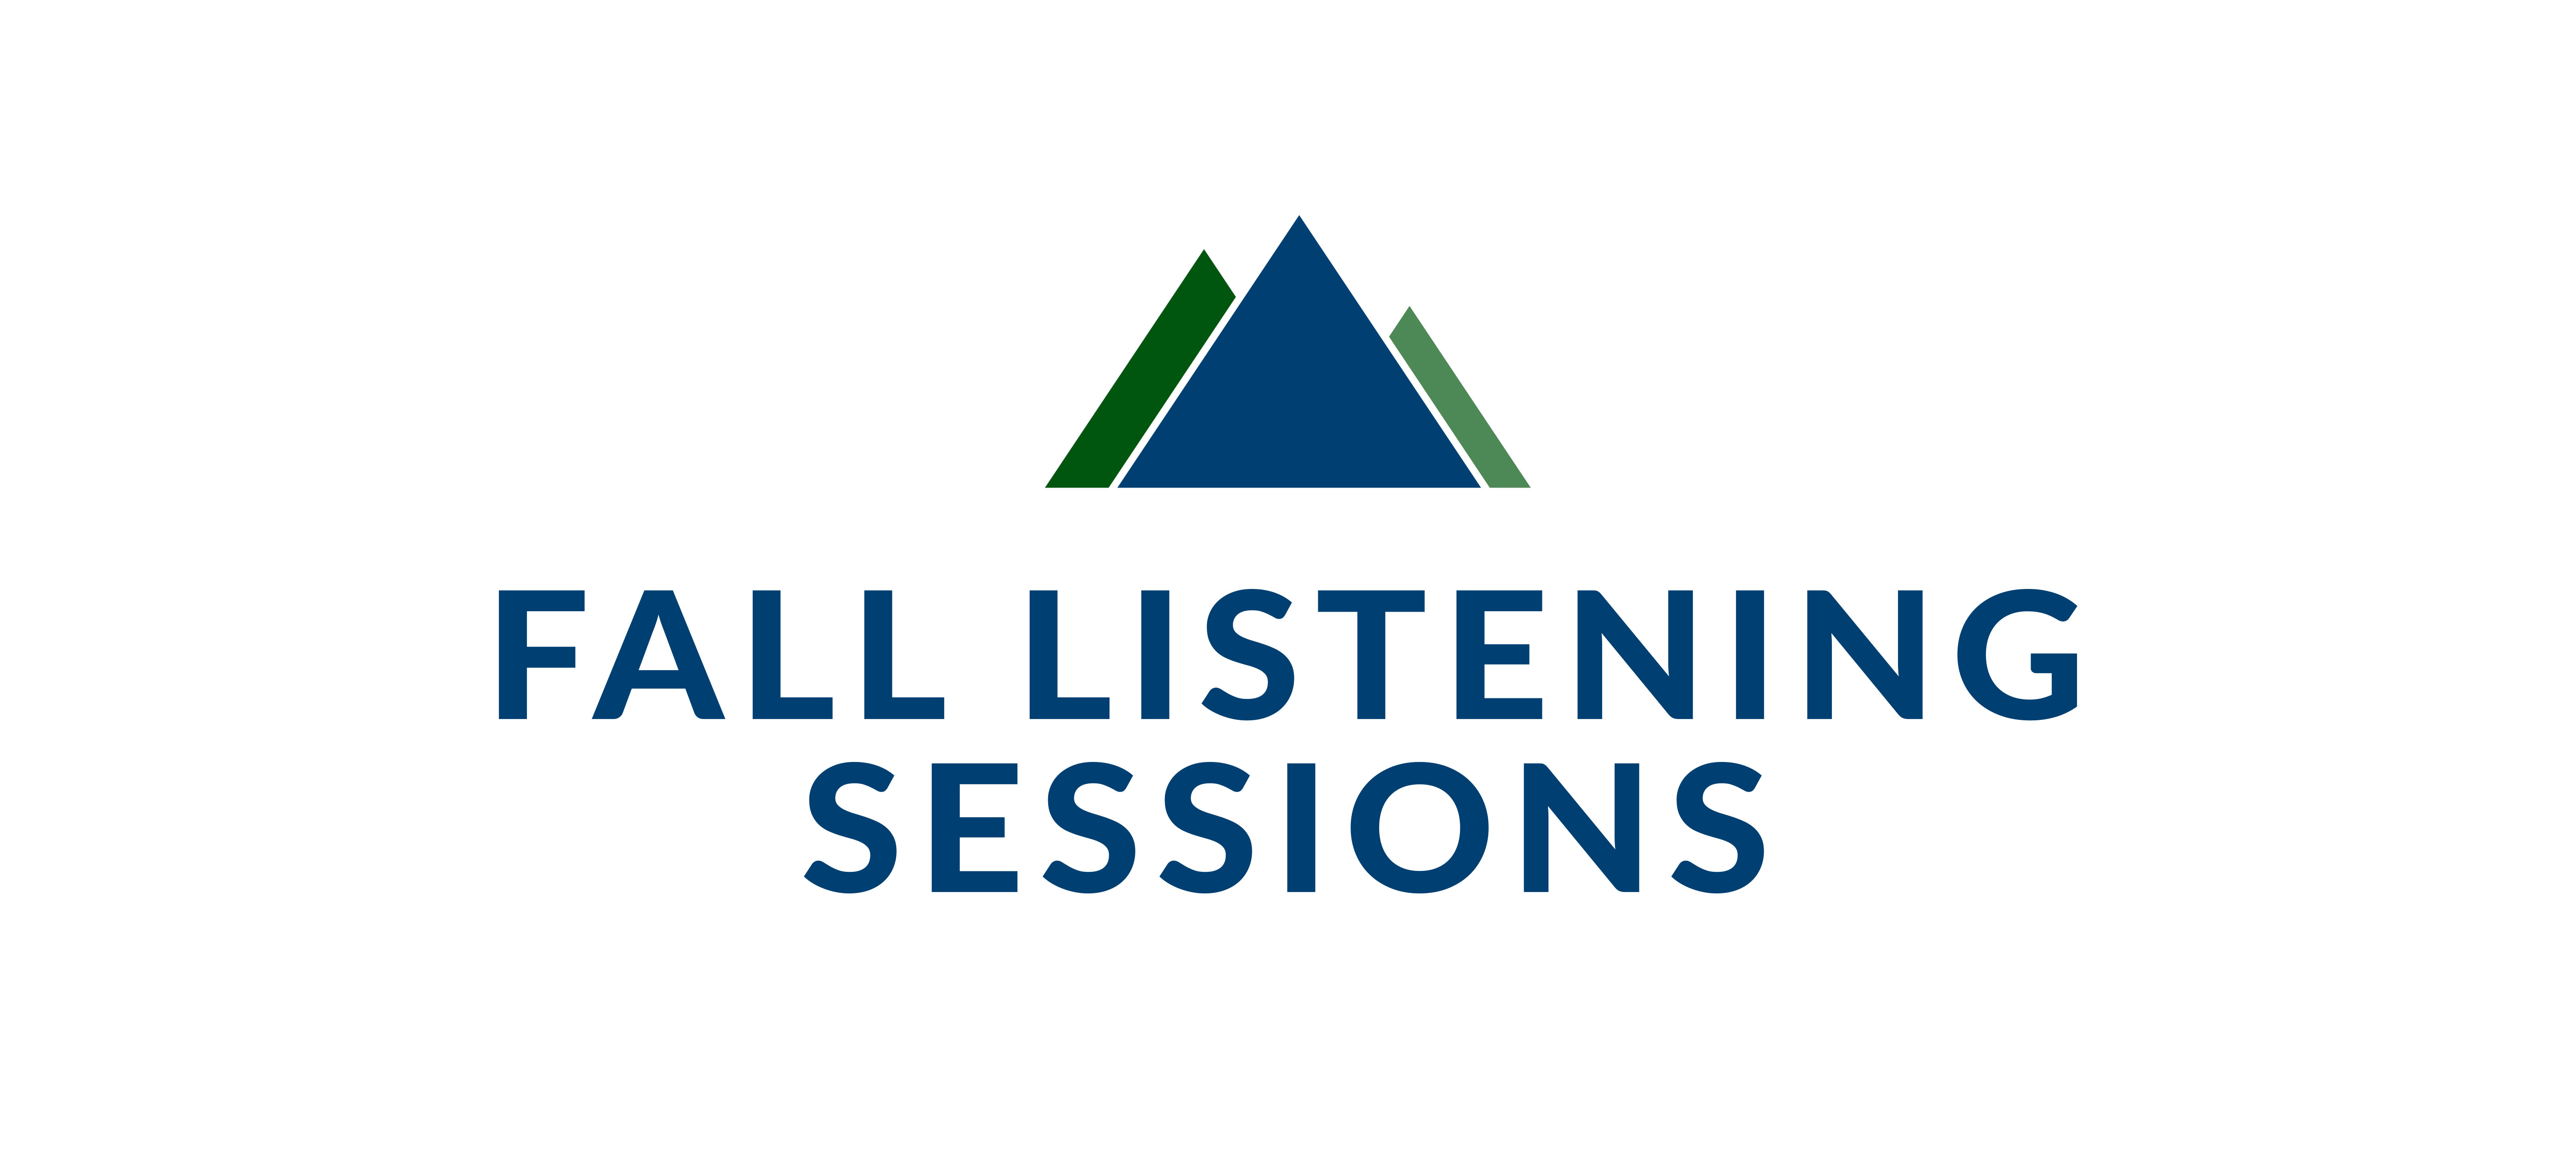 Fall Listening Sessions